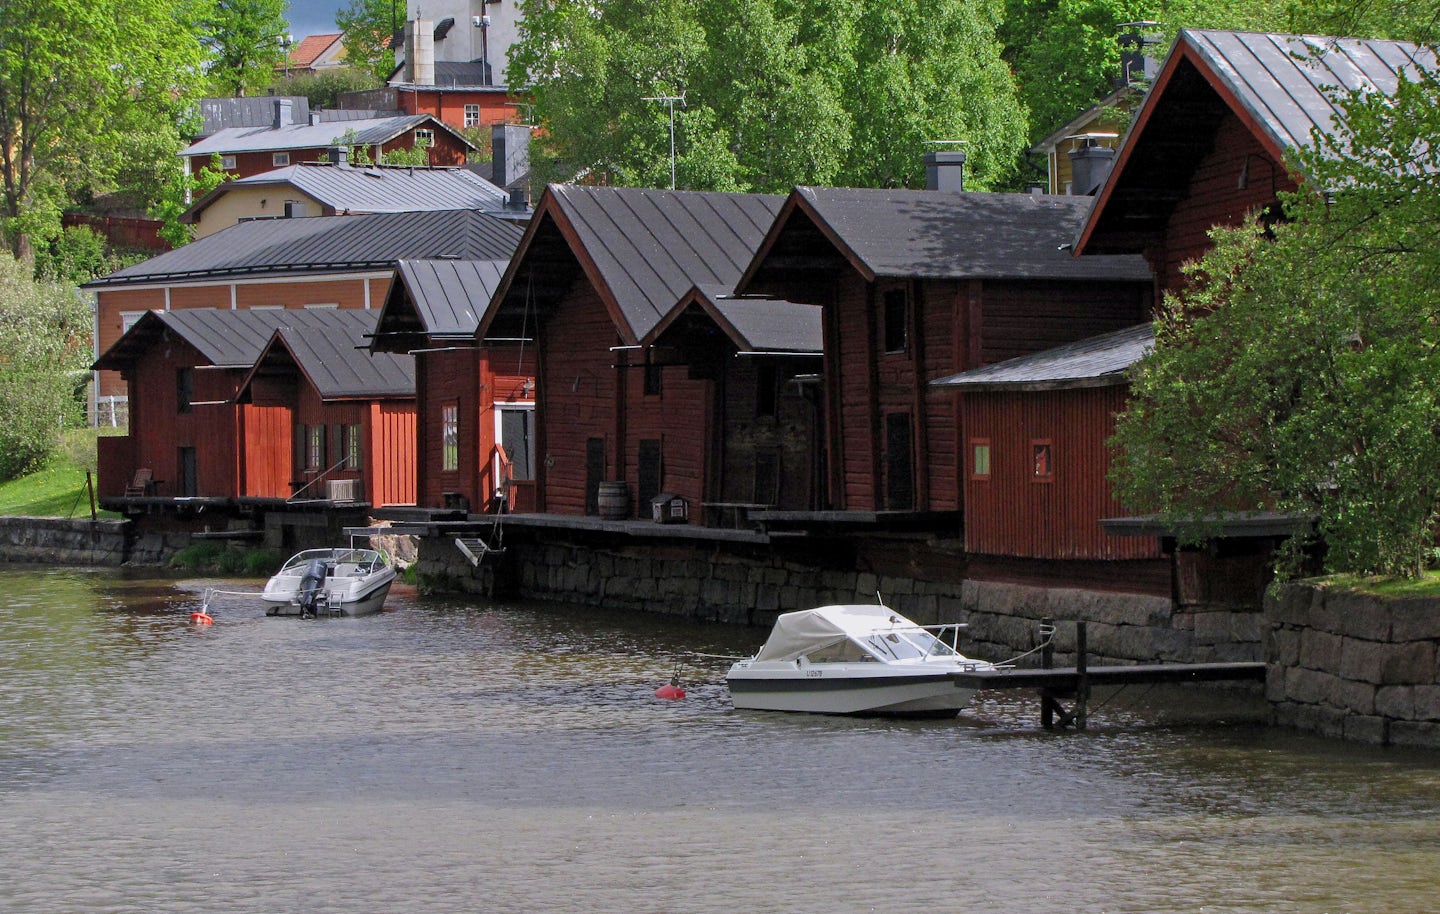 Tour to Porvoo, about an hour from Helsinki. Charming village.